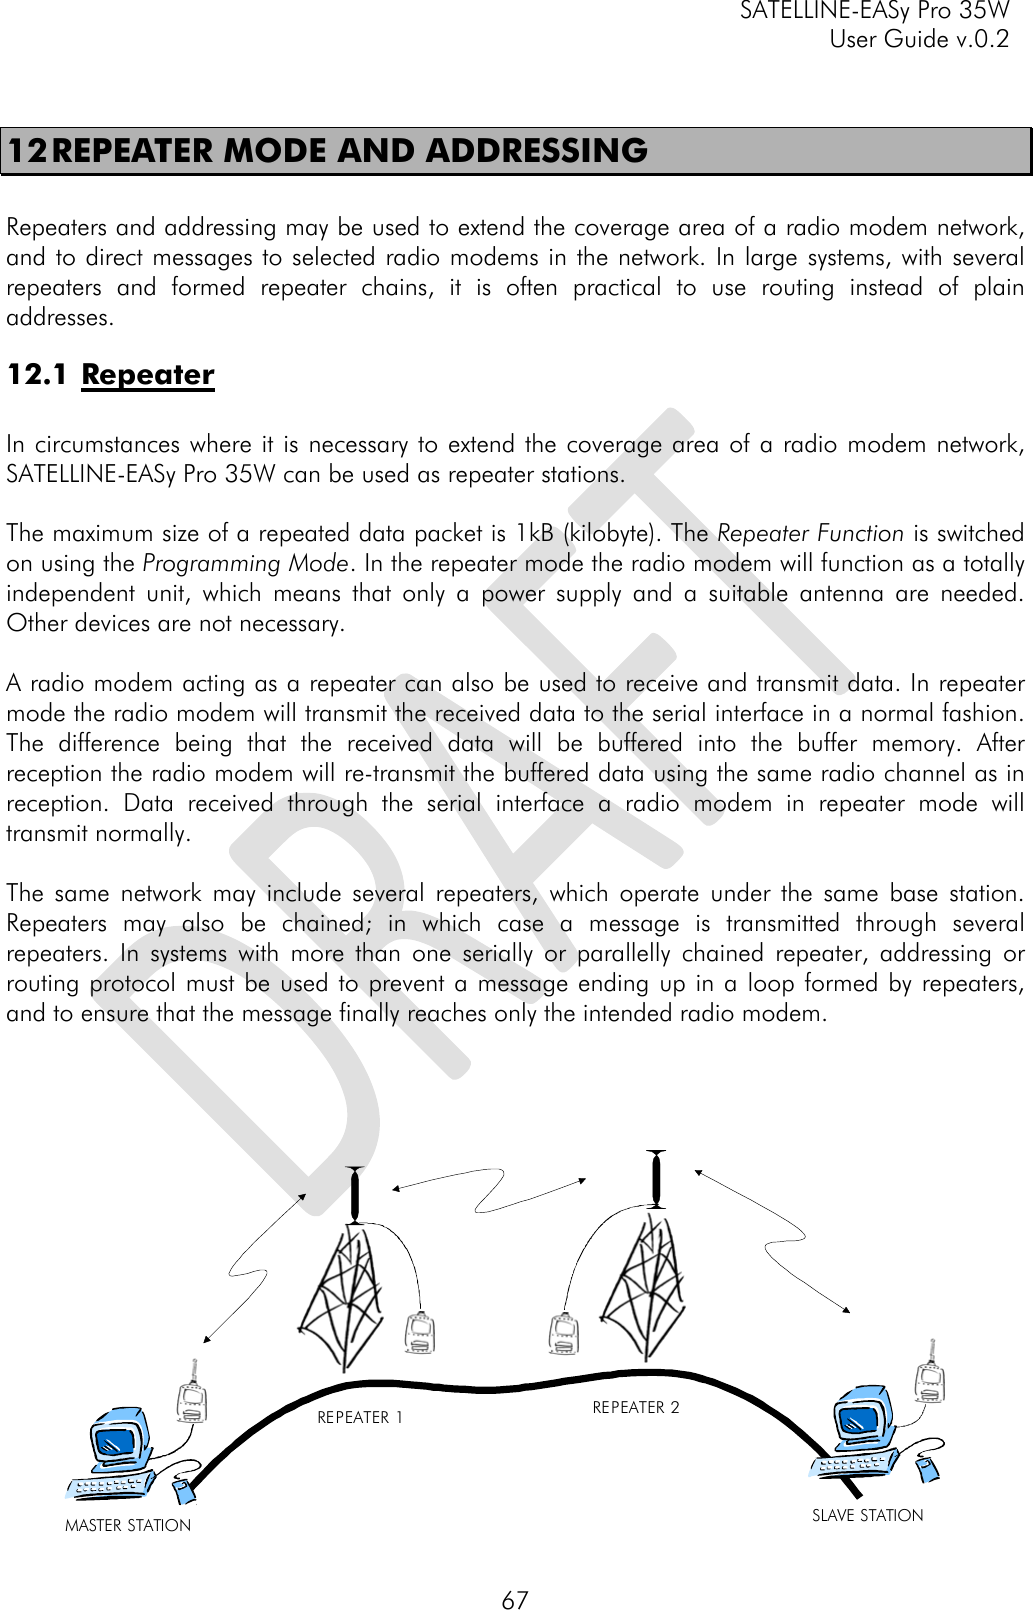     SATELLINE-EASy Pro 35W   User Guide v.0.2  67 12 REPEATER MODE AND ADDRESSING  Repeaters and addressing may be used to extend the coverage area of a radio modem network, and to direct messages to selected radio modems in the network. In large systems, with several repeaters and formed repeater chains, it is often practical to use routing instead of plain addresses. 12.1 Repeater  In circumstances where it is necessary to extend the coverage area of a radio modem network, SATELLINE-EASy Pro 35W can be used as repeater stations.  The maximum size of a repeated data packet is 1kB (kilobyte). The Repeater Function is switched on using the Programming Mode. In the repeater mode the radio modem will function as a totally independent unit, which means that only a power supply and a suitable antenna are needed. Other devices are not necessary.   A radio modem acting as a repeater can also be used to receive and transmit data. In repeater mode the radio modem will transmit the received data to the serial interface in a normal fashion. The difference being that the received data will be buffered into the buffer memory. After reception the radio modem will re-transmit the buffered data using the same radio channel as in reception. Data received through the serial interface a radio modem in repeater mode will transmit normally.  The same network may include several repeaters, which operate under the same base station. Repeaters may also be chained; in which case a message is transmitted through several repeaters. In systems with more than one serially or parallelly chained repeater, addressing or routing protocol must be used to prevent a message ending up in a loop formed by repeaters, and to ensure that the message finally reaches only the intended radio modem.       MASTER STATION REPEATER 1 REPEATER 2SLAVE STATION